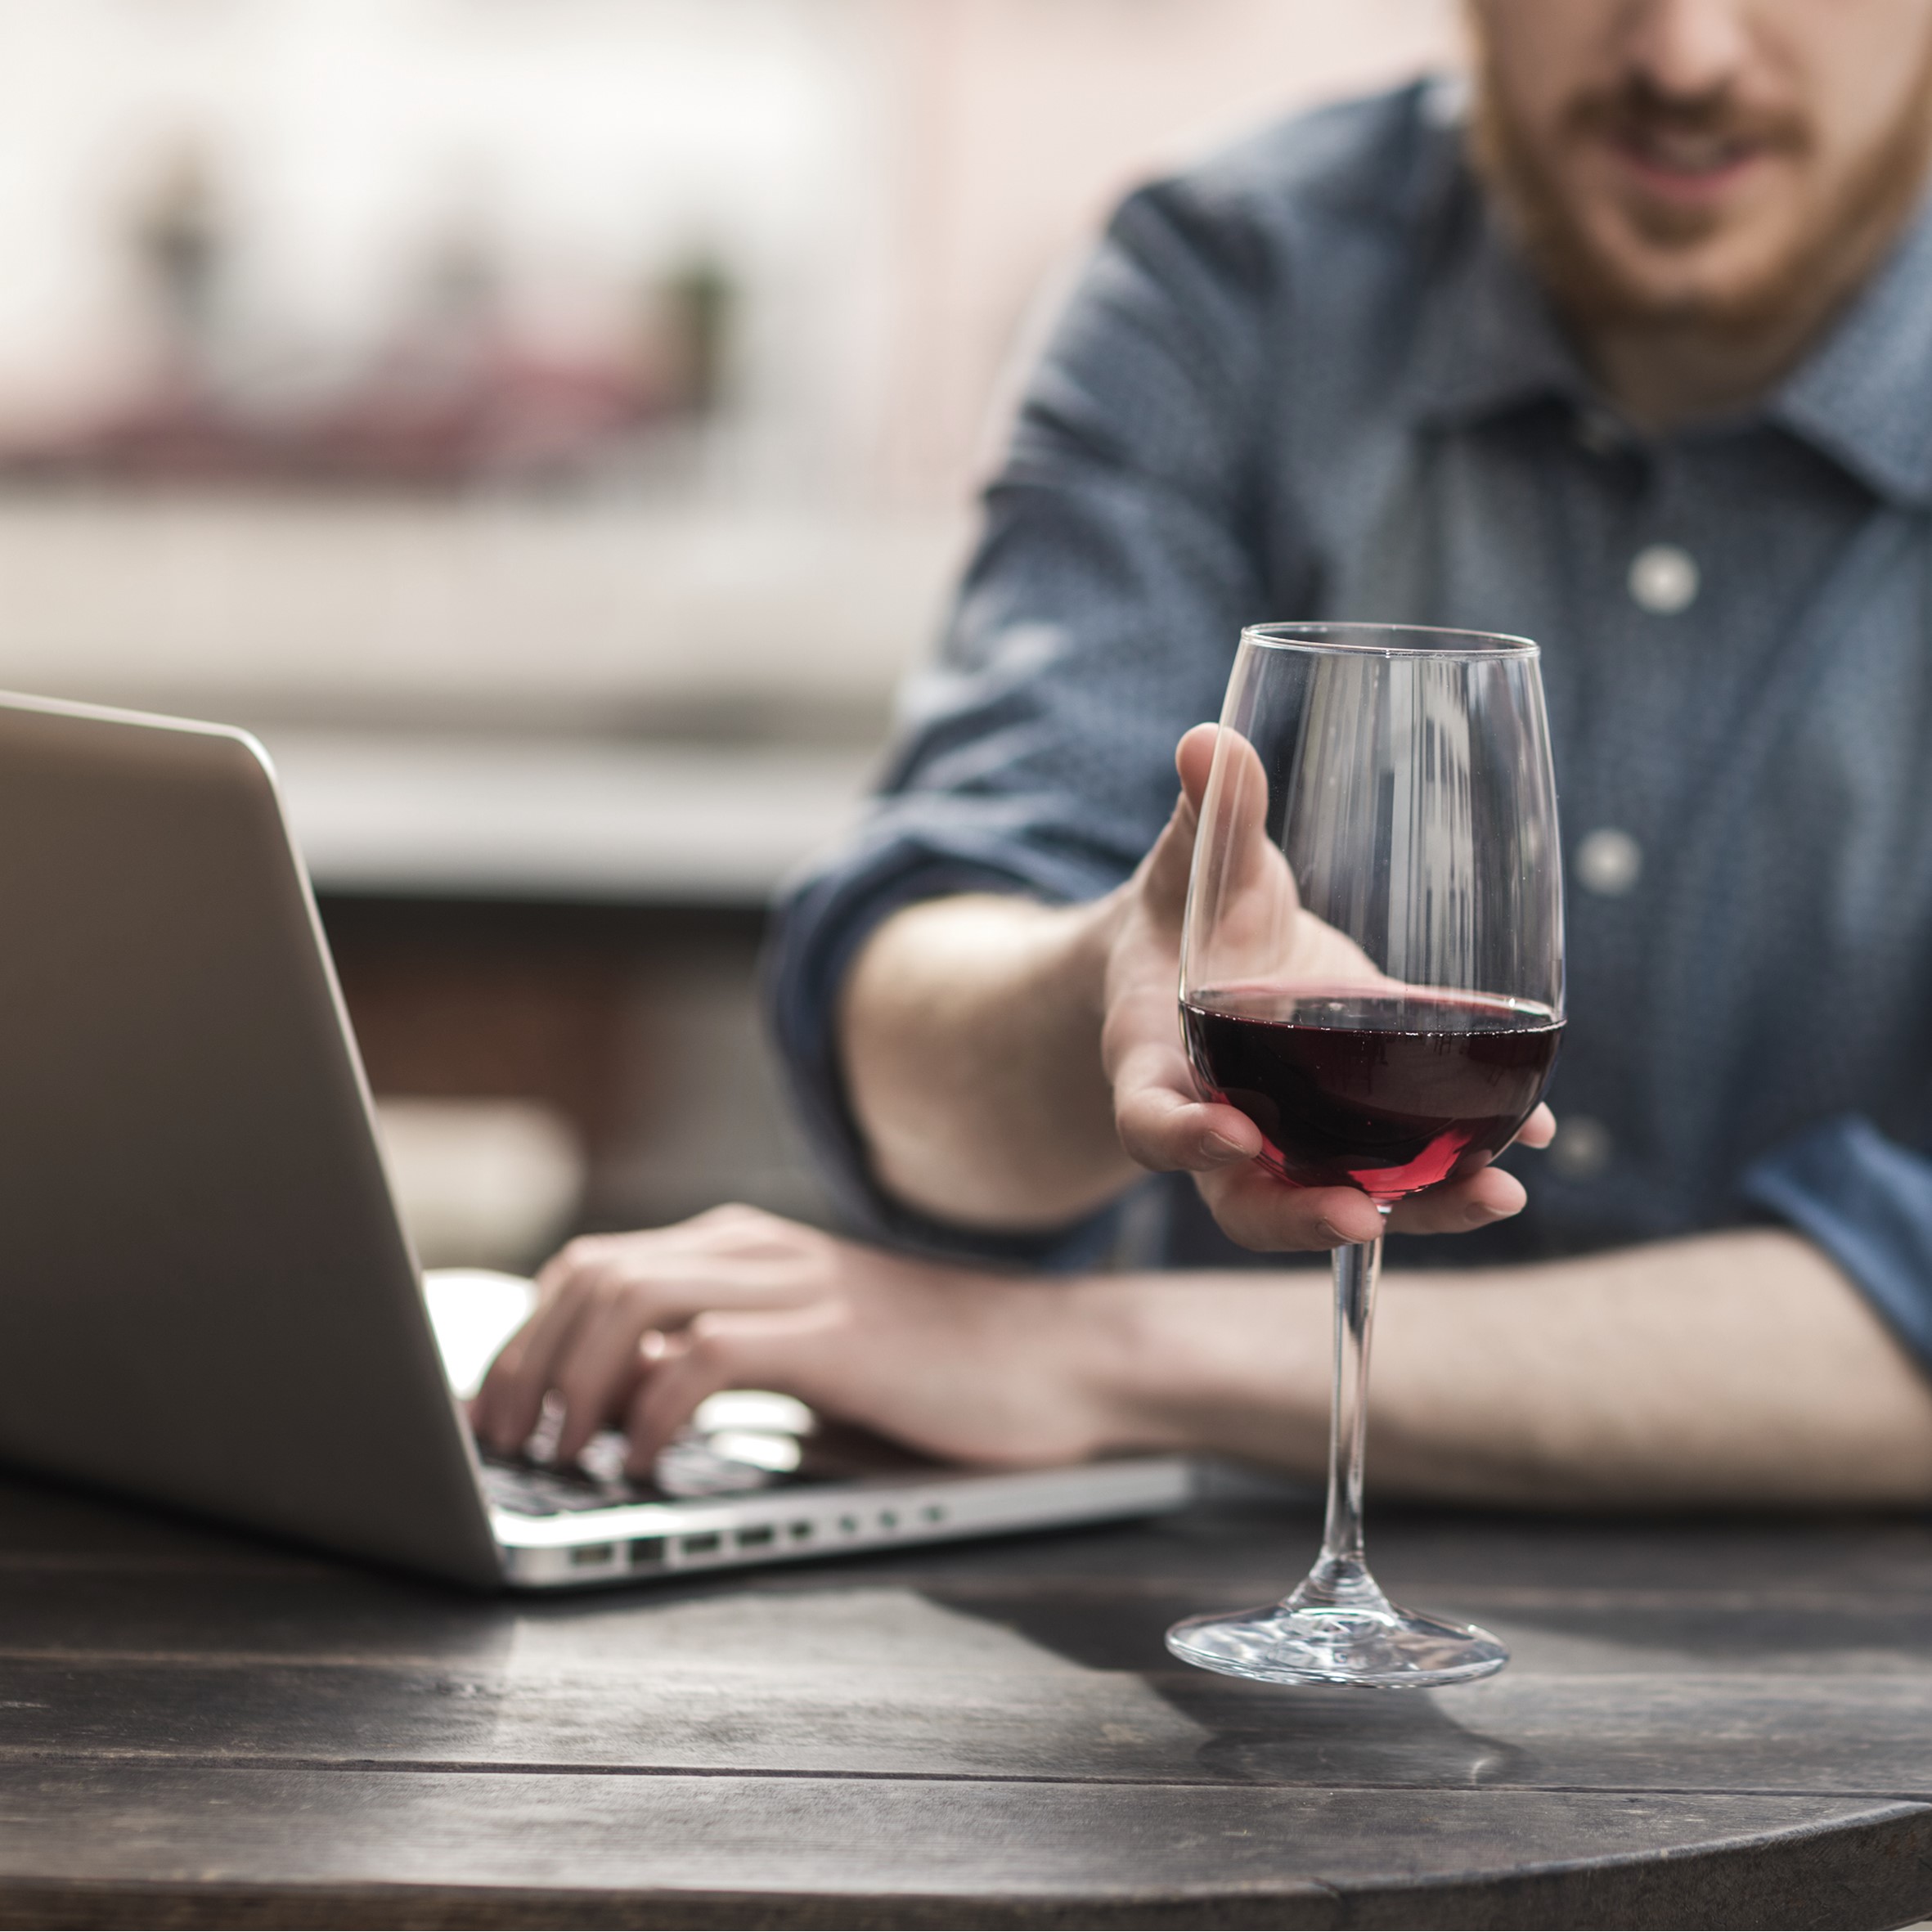 Brazil technology 2 - One in five South Korean wine drinkers now purchase wine online